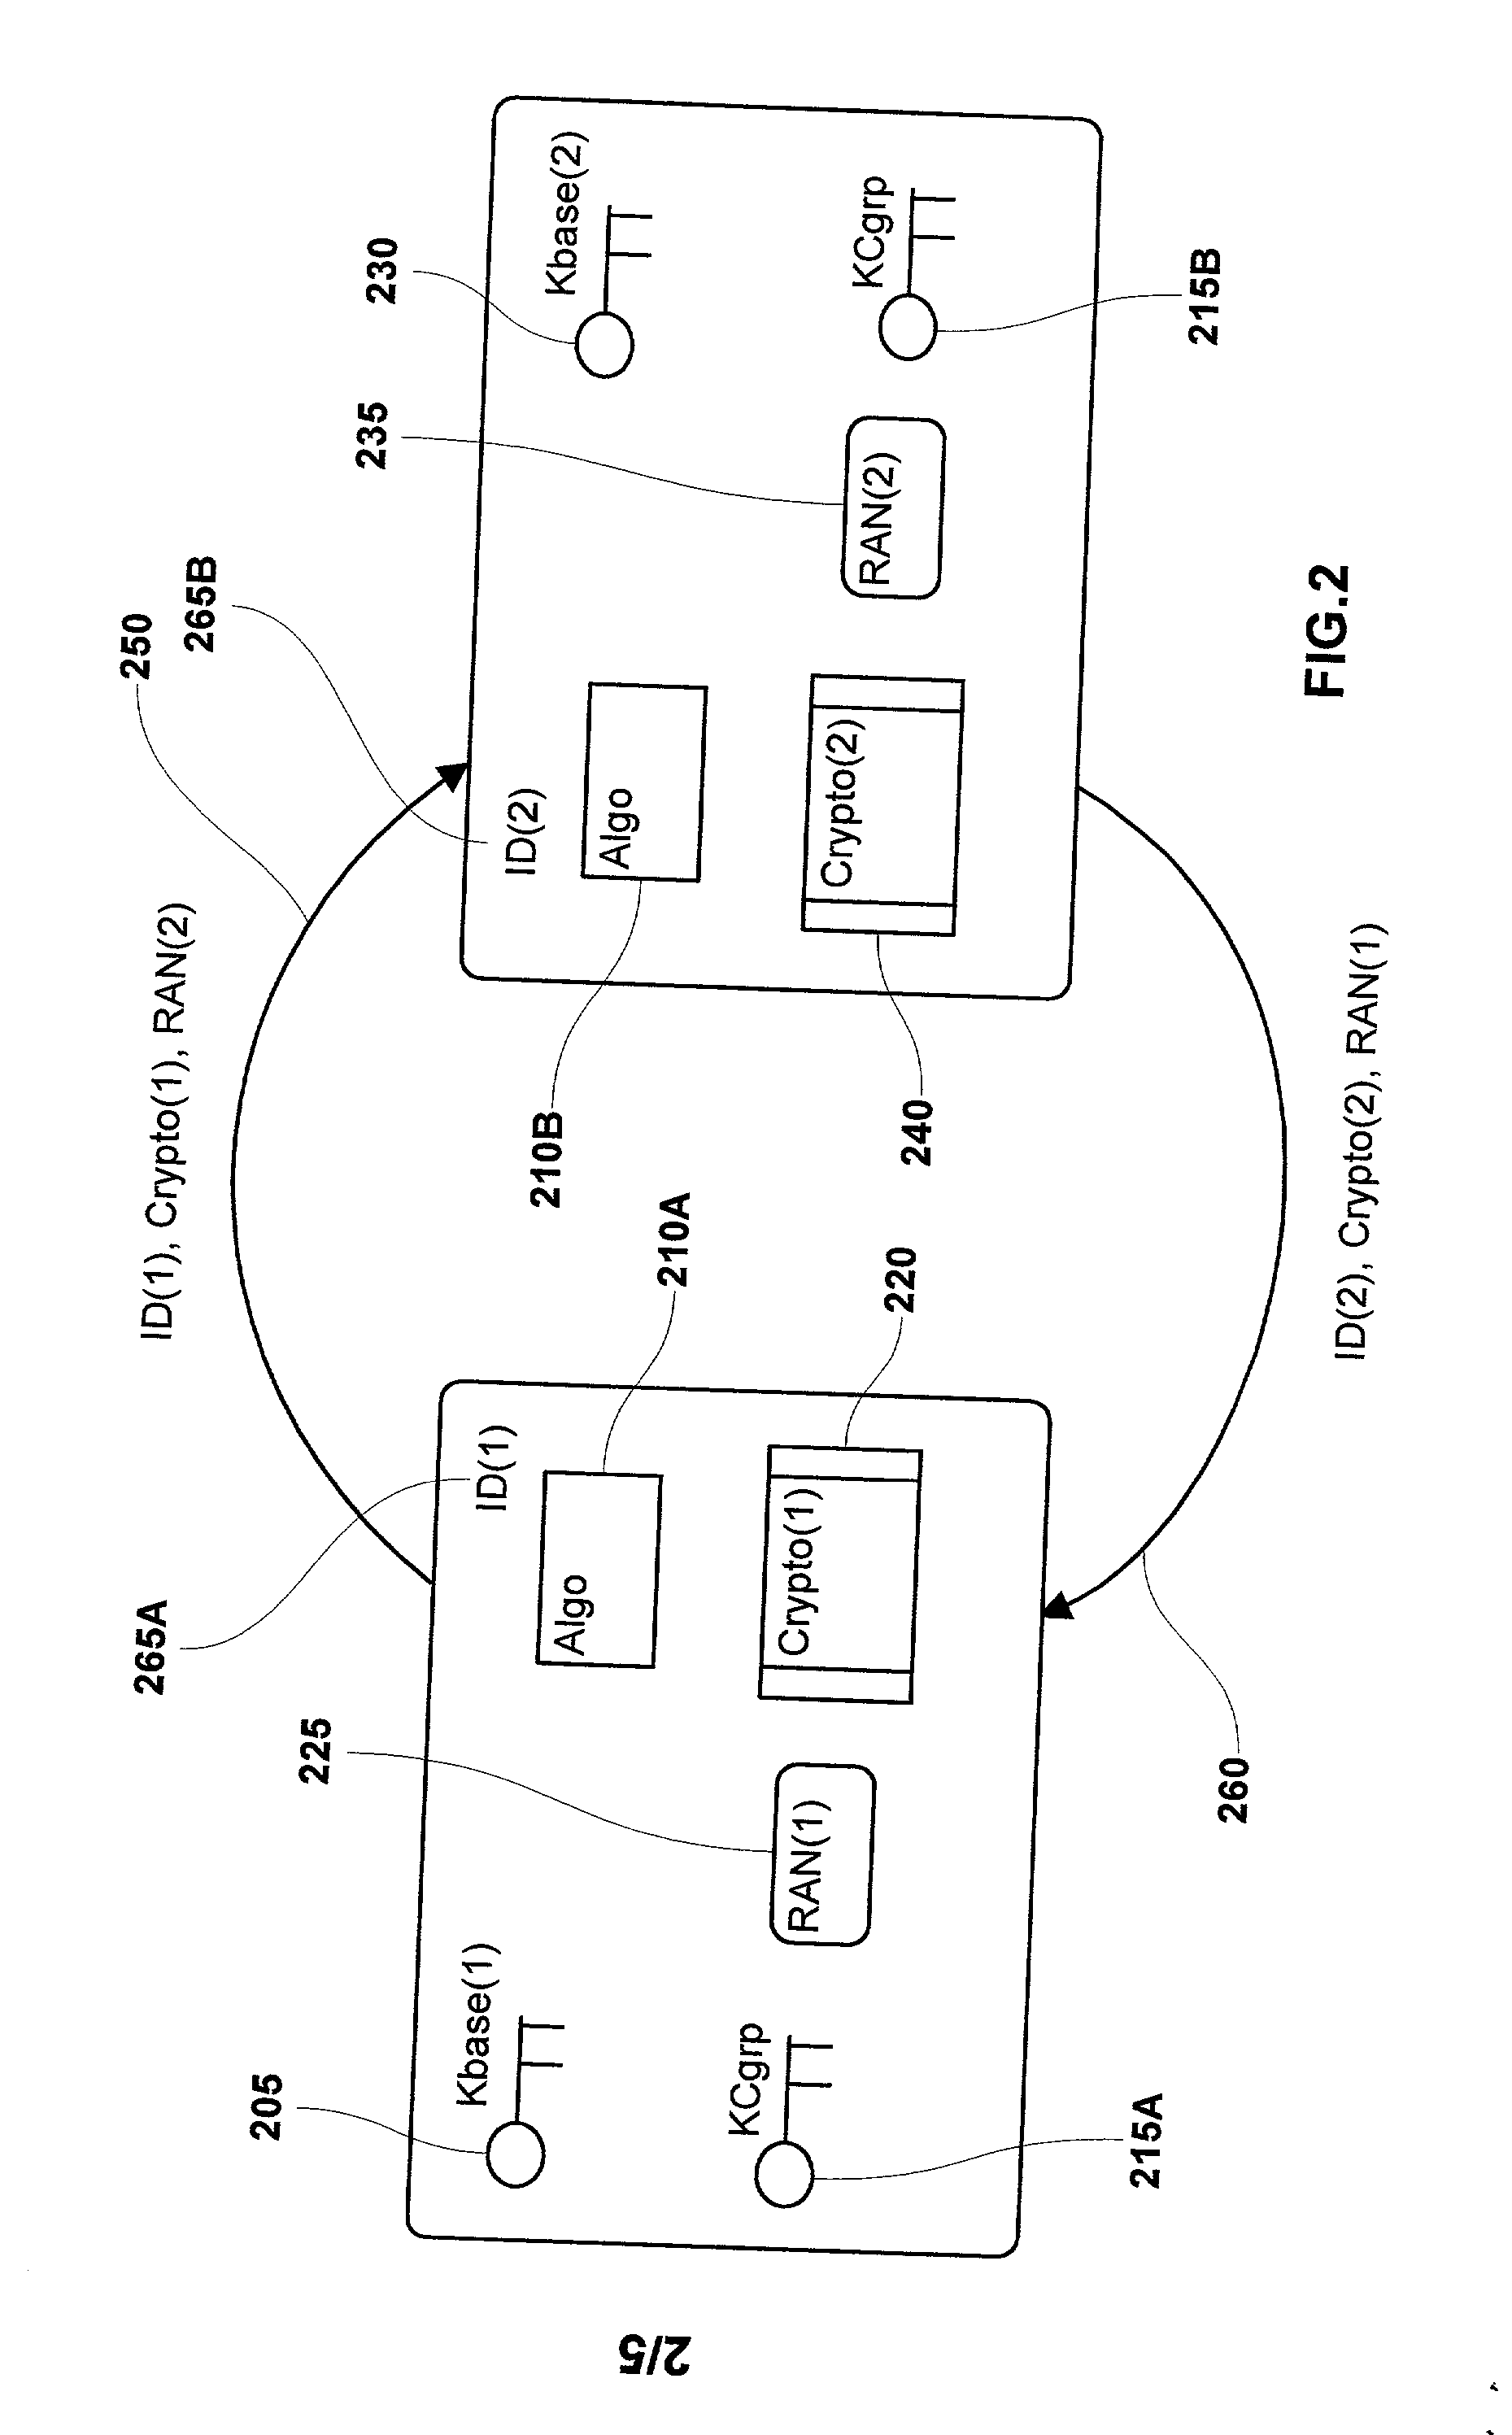 System and method for performing mutual authentications between security tokens